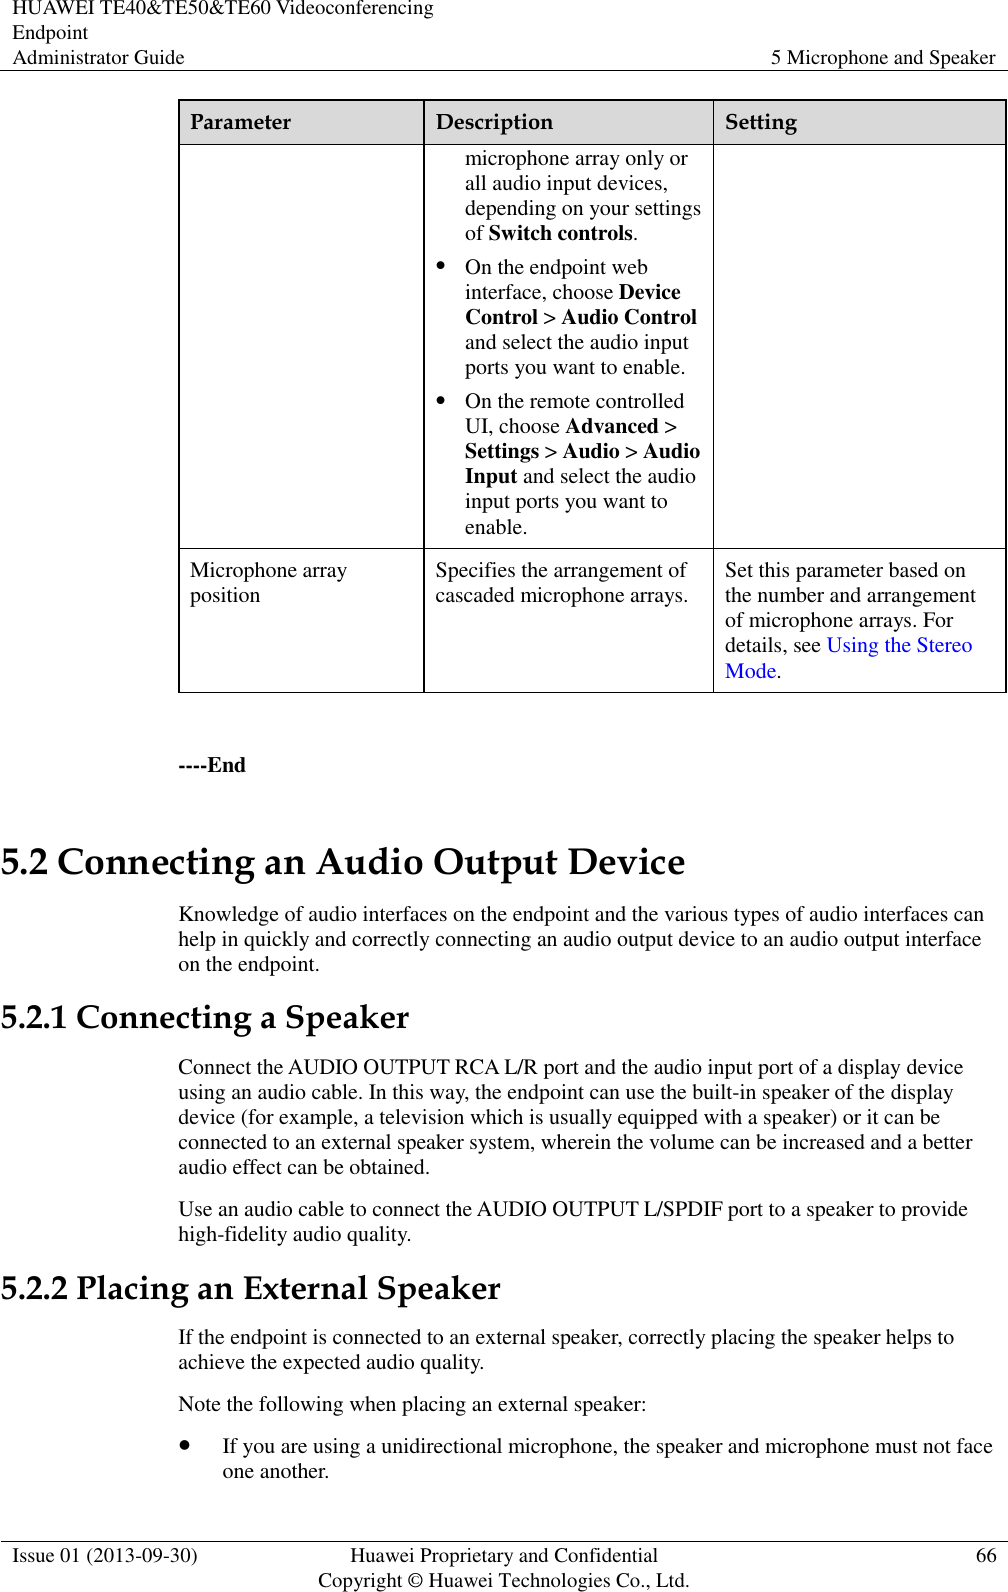 HUAWEI TE40&amp;TE50&amp;TE60 Videoconferencing Endpoint Administrator Guide 5 Microphone and Speaker  Issue 01 (2013-09-30) Huawei Proprietary and Confidential                                     Copyright © Huawei Technologies Co., Ltd. 66  Parameter Description Setting microphone array only or all audio input devices, depending on your settings of Switch controls.  On the endpoint web interface, choose Device Control &gt; Audio Control and select the audio input ports you want to enable.  On the remote controlled UI, choose Advanced &gt; Settings &gt; Audio &gt; Audio Input and select the audio input ports you want to enable. Microphone array position Specifies the arrangement of cascaded microphone arrays. Set this parameter based on the number and arrangement of microphone arrays. For details, see Using the Stereo Mode.  ----End 5.2 Connecting an Audio Output Device Knowledge of audio interfaces on the endpoint and the various types of audio interfaces can help in quickly and correctly connecting an audio output device to an audio output interface on the endpoint. 5.2.1 Connecting a Speaker Connect the AUDIO OUTPUT RCA L/R port and the audio input port of a display device using an audio cable. In this way, the endpoint can use the built-in speaker of the display device (for example, a television which is usually equipped with a speaker) or it can be connected to an external speaker system, wherein the volume can be increased and a better audio effect can be obtained. Use an audio cable to connect the AUDIO OUTPUT L/SPDIF port to a speaker to provide high-fidelity audio quality. 5.2.2 Placing an External Speaker If the endpoint is connected to an external speaker, correctly placing the speaker helps to achieve the expected audio quality. Note the following when placing an external speaker:  If you are using a unidirectional microphone, the speaker and microphone must not face one another. 